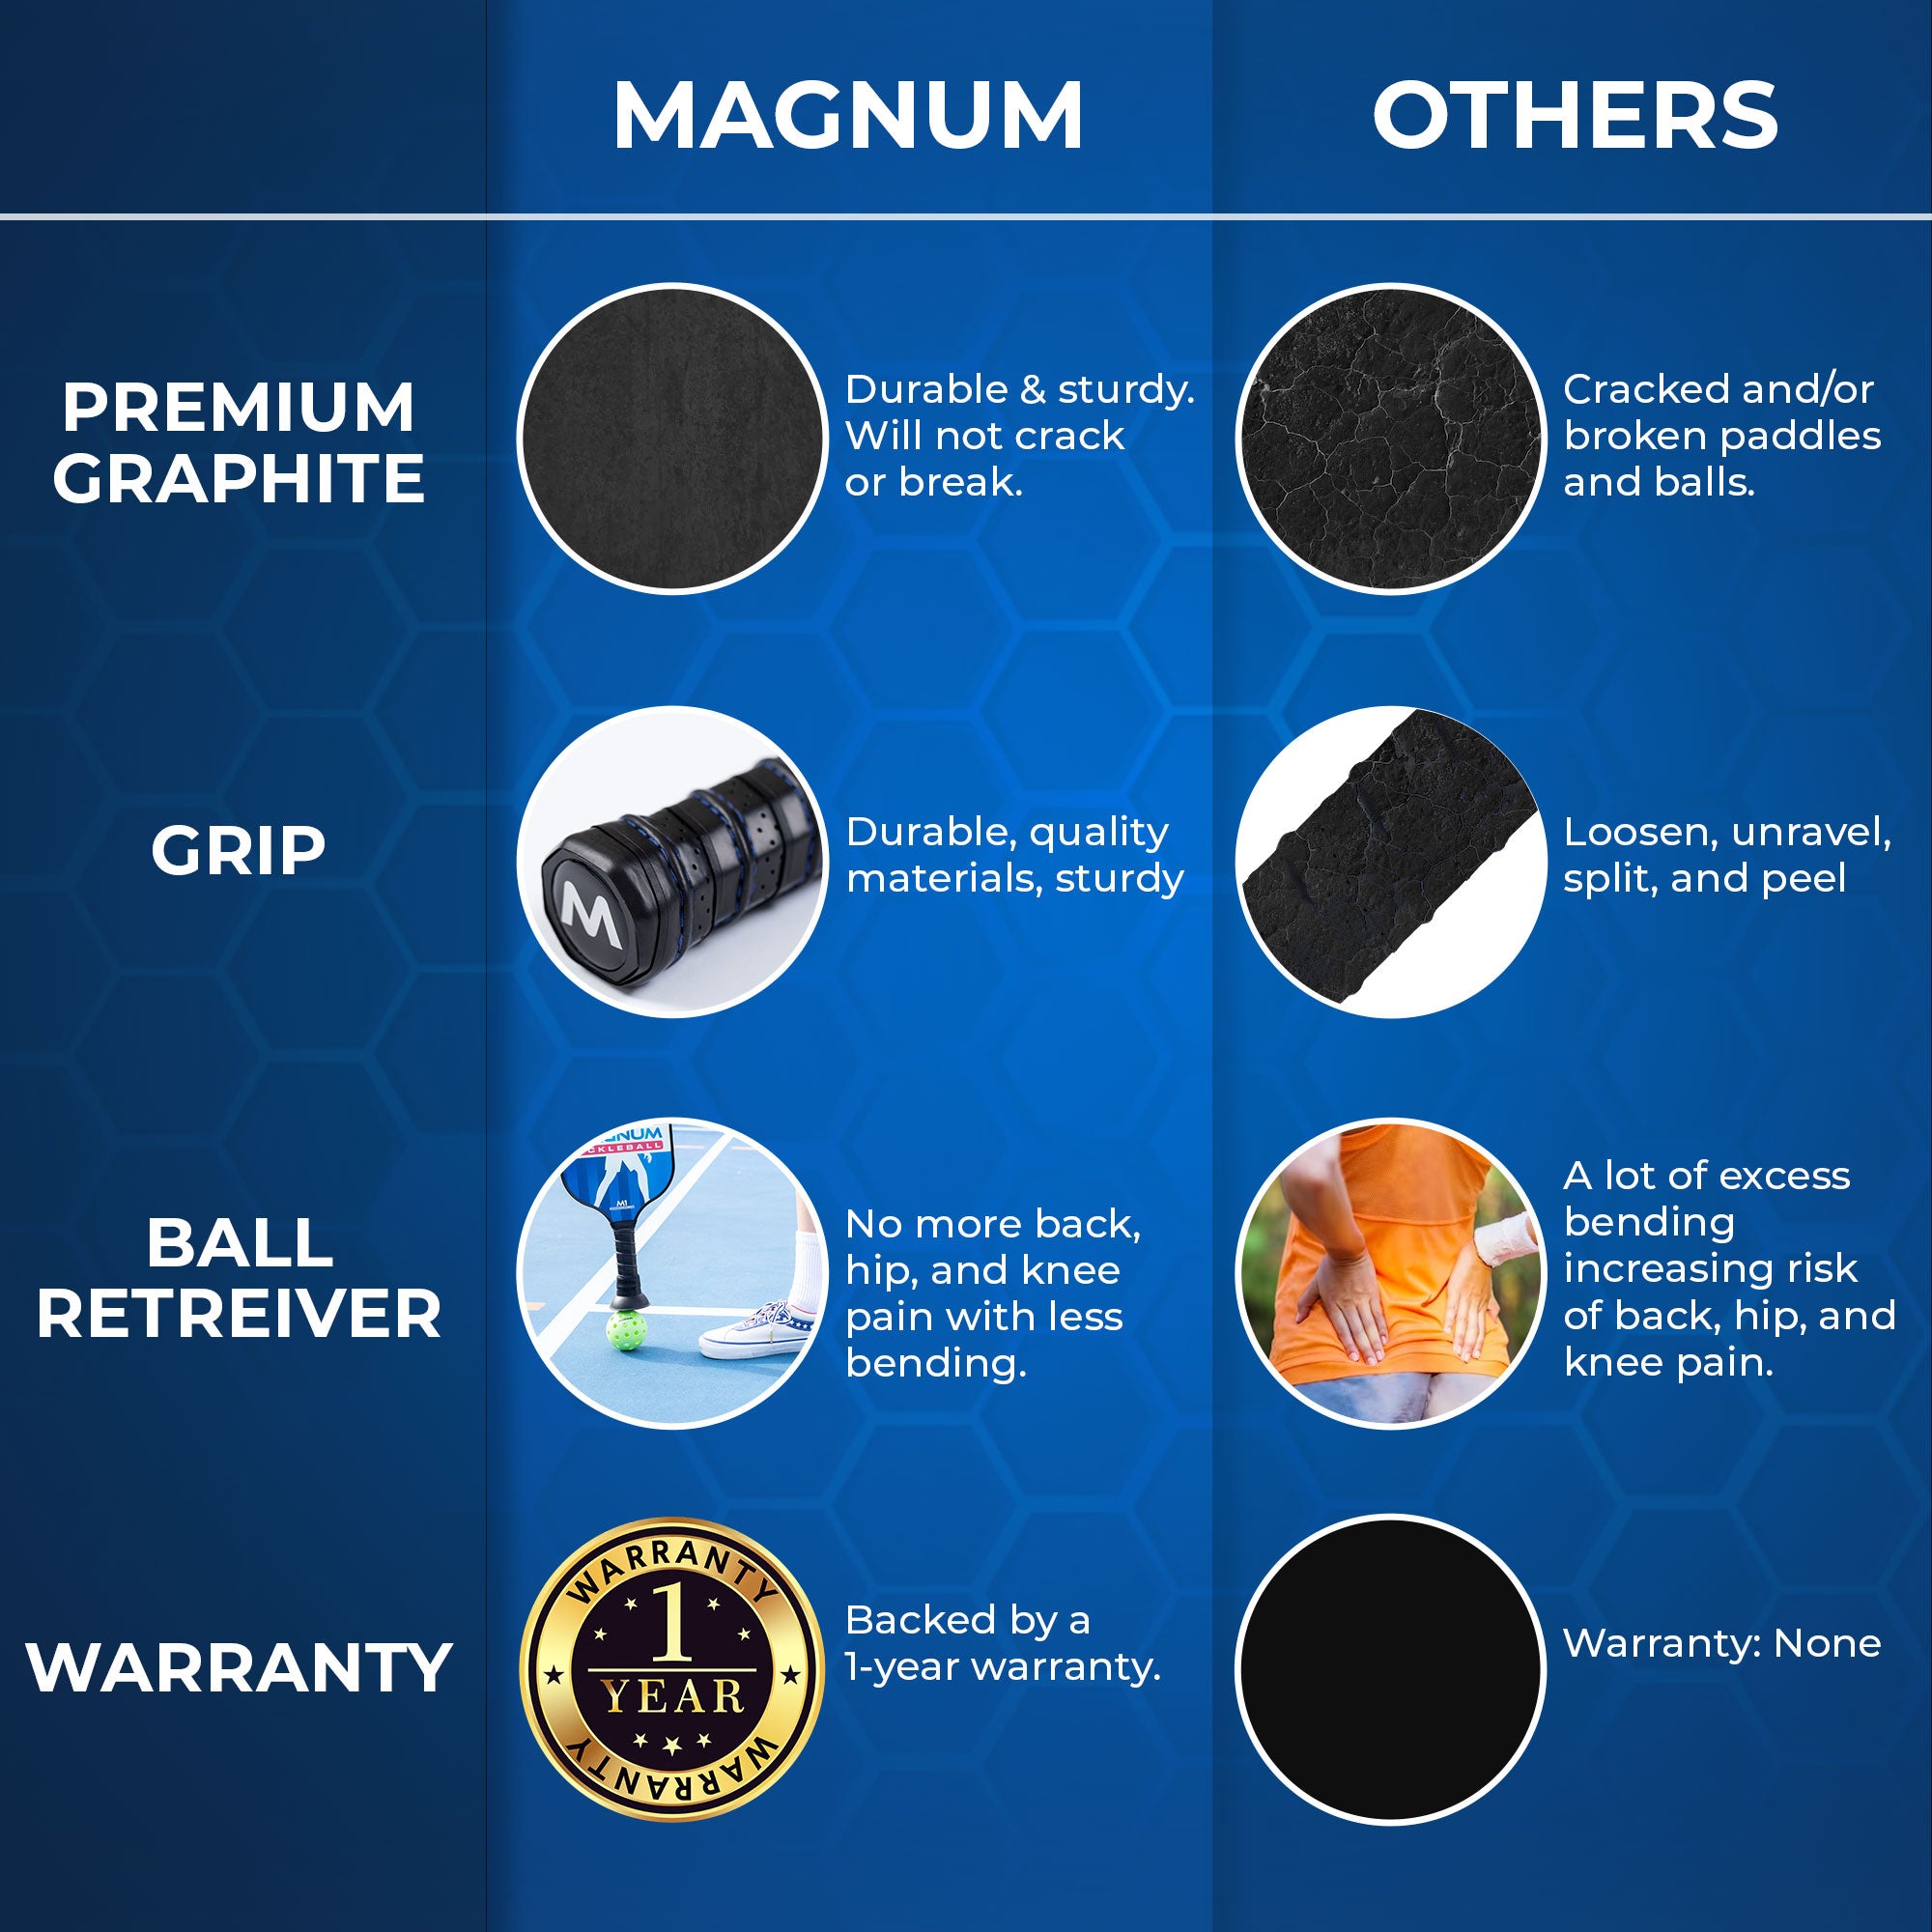 Magnum Pickleball is built better than the competition